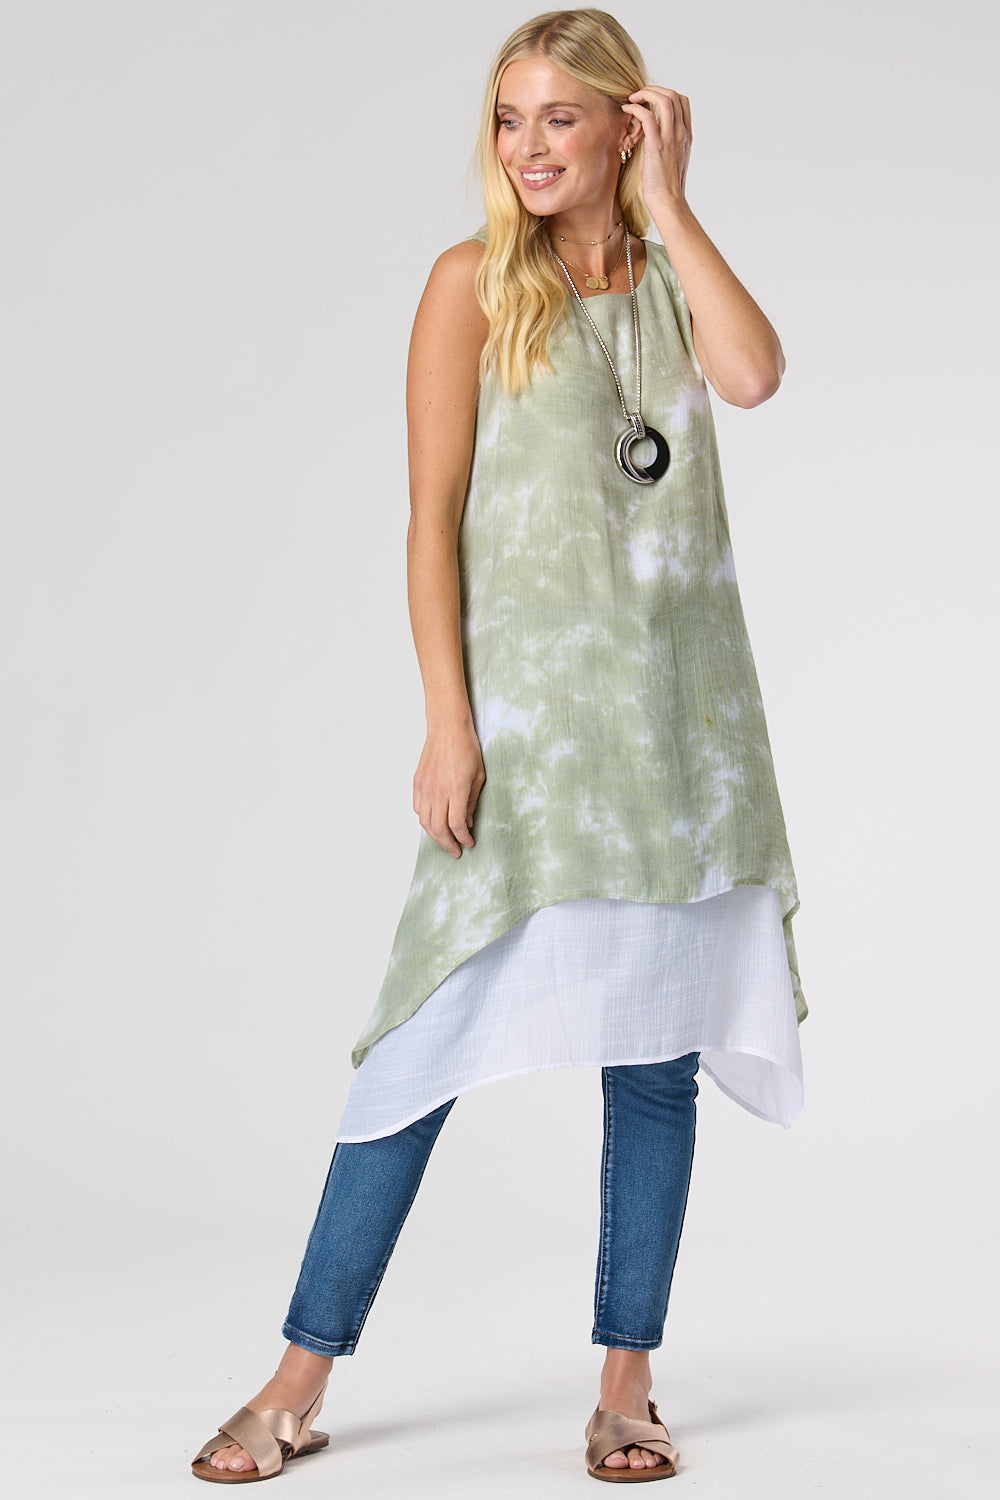 Saloos Swing Tie Dye Dress with Necklace